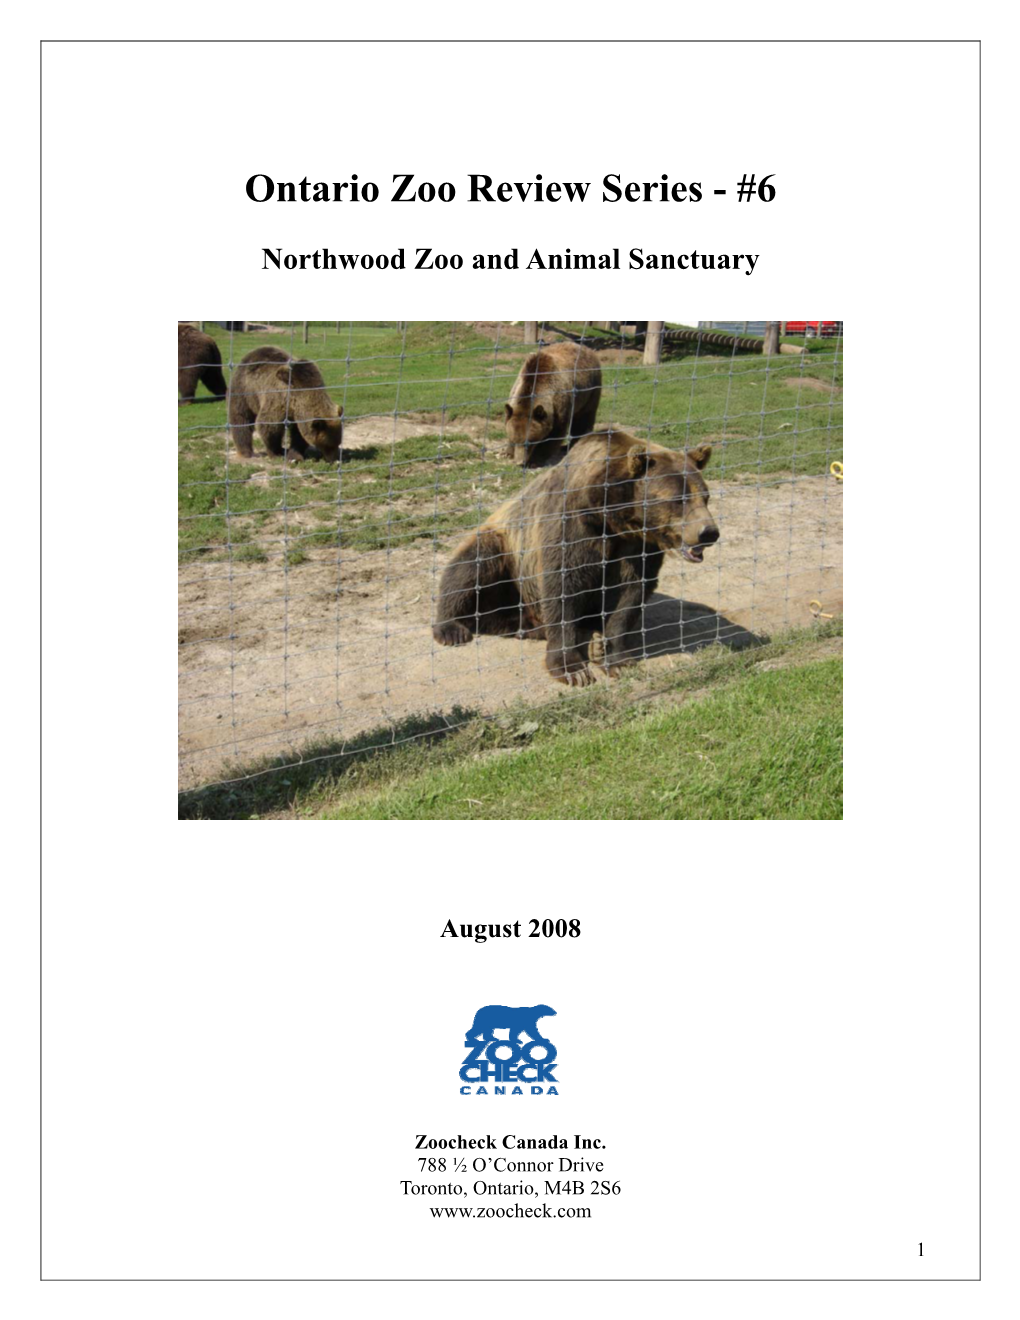 Ontario Zoo Review Series – #6, Northwood Zoo and Animal Sanctuary